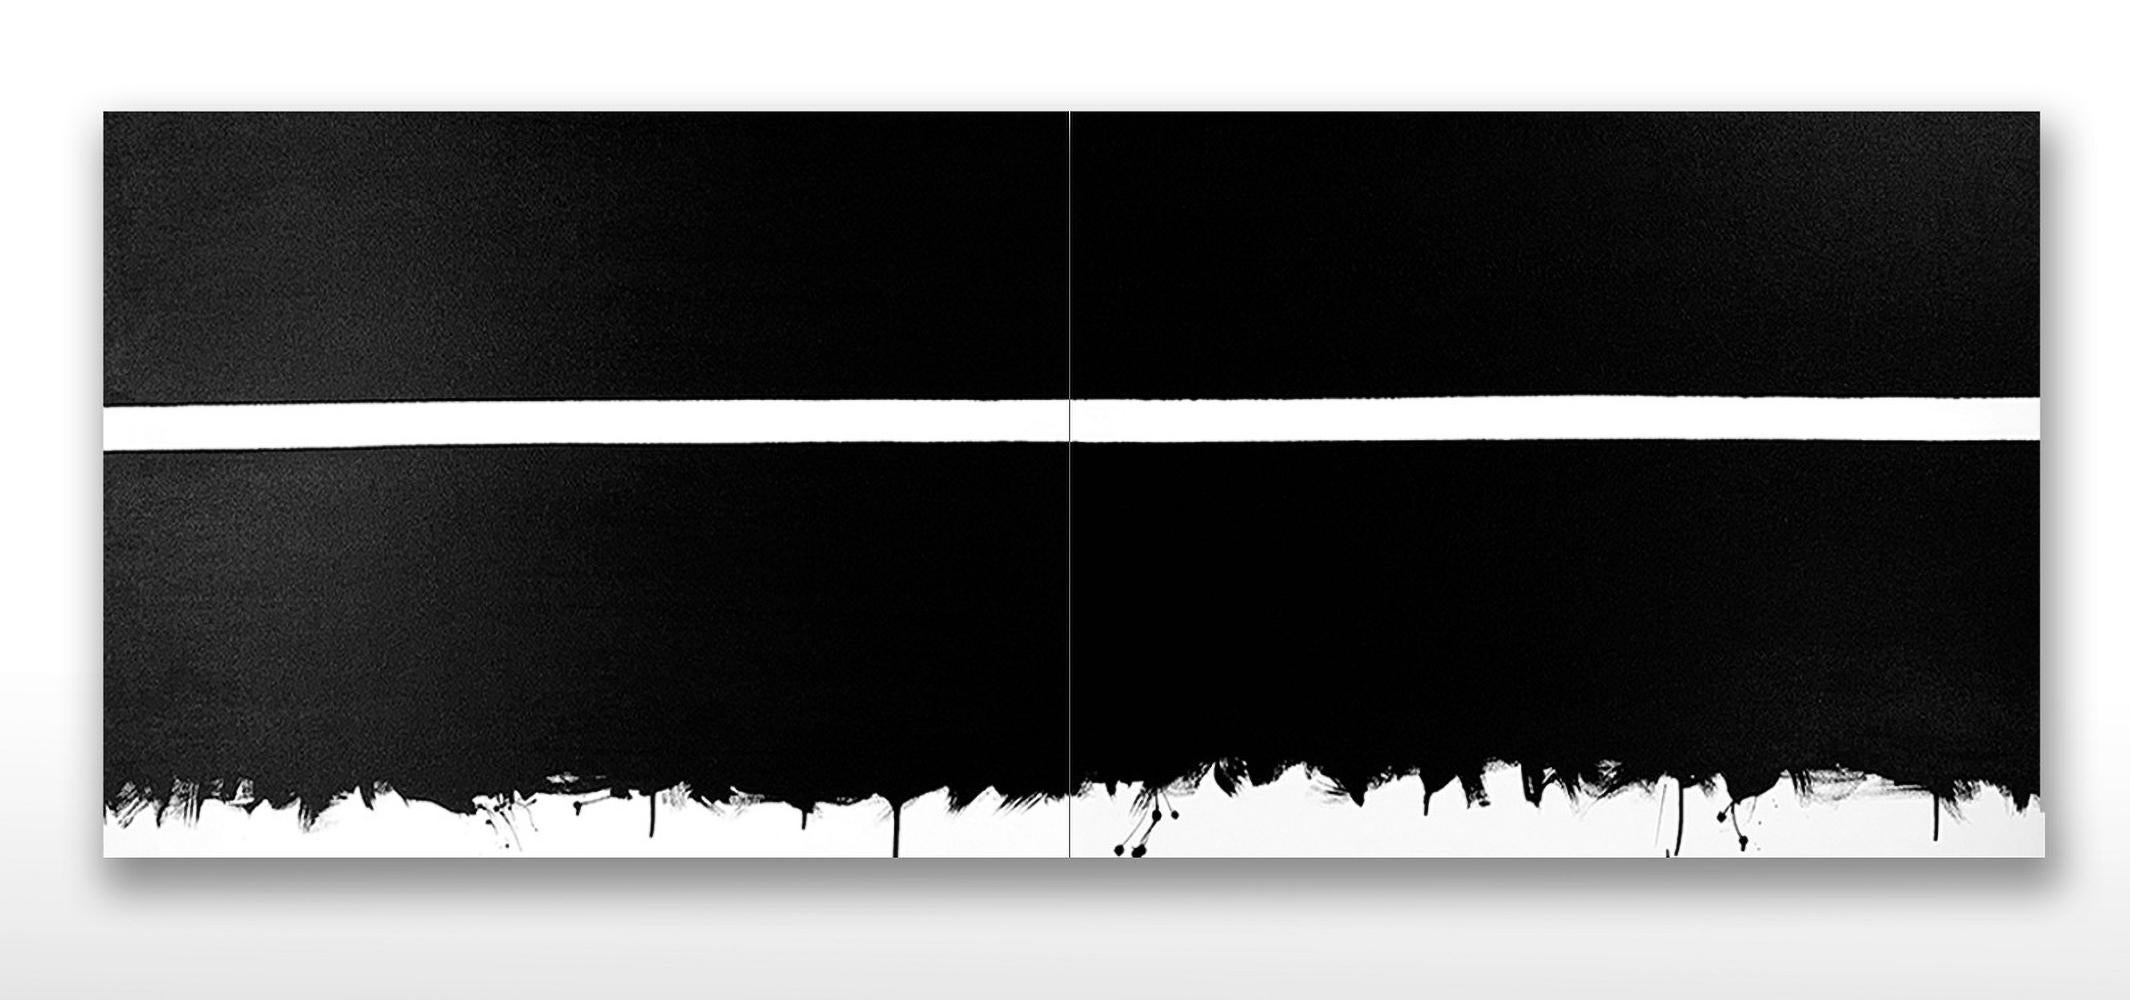 Paradox 01 02 - bold, black and white, abstract minimalist, acrylic on canvas 2